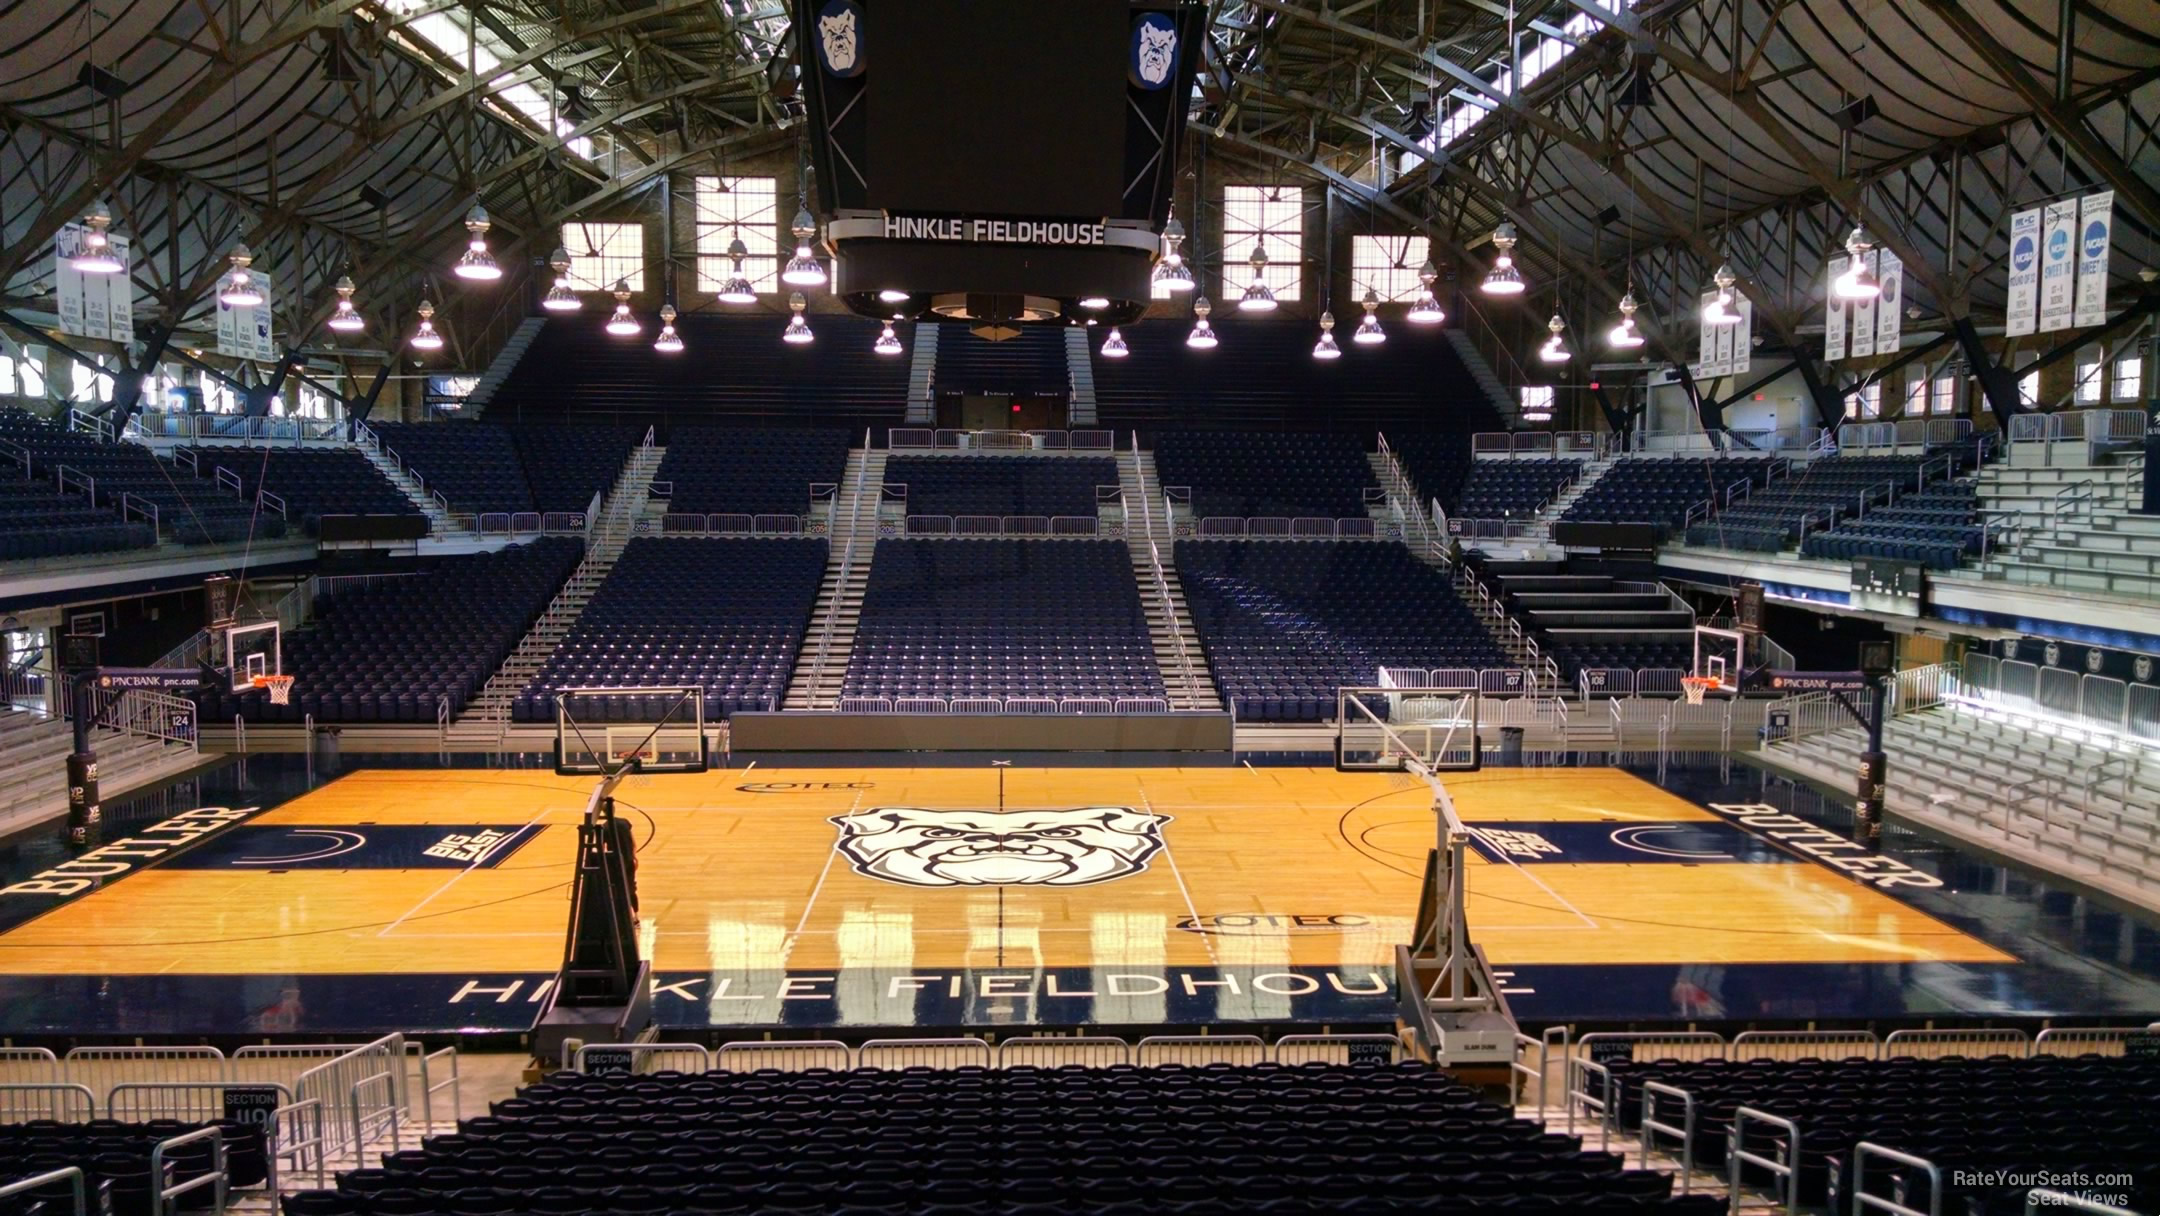 section 218, row 3 seat view  - hinkle fieldhouse